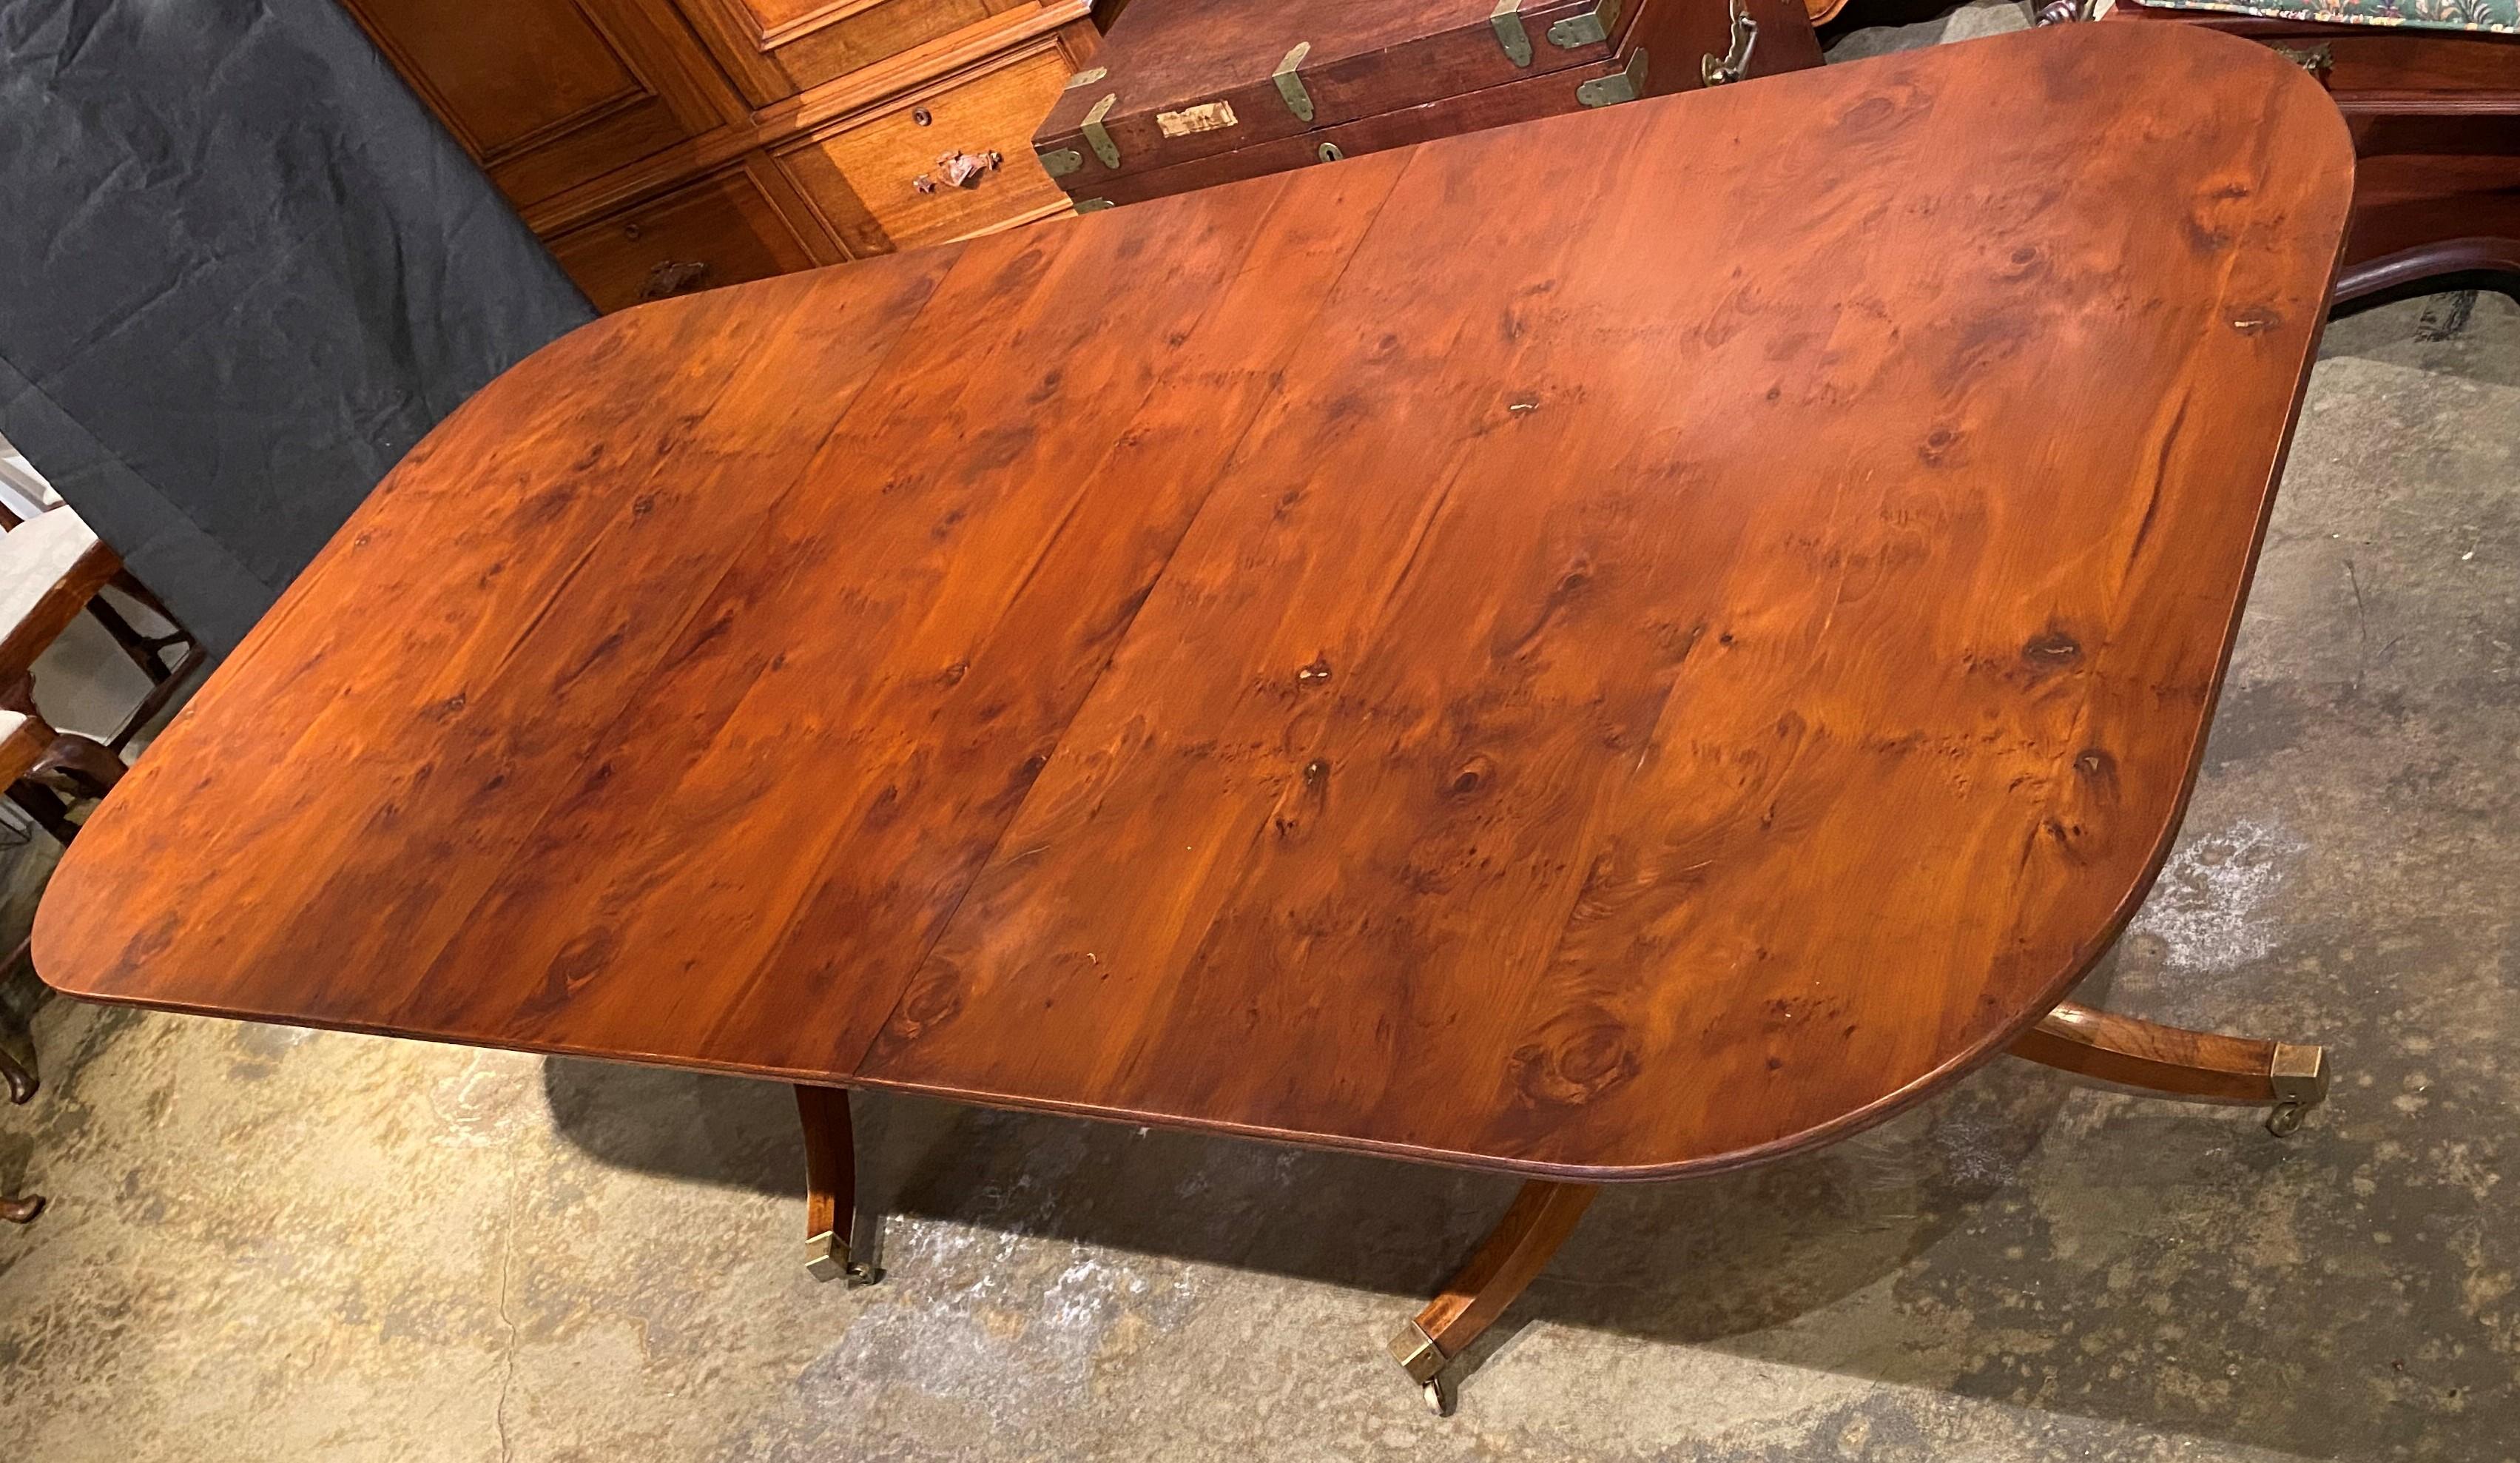 A fine example of a double pedestal dining table with yew wood top with tilt top sections with out swept tripod bases terminating with brass caps and casters, expandable with one large 27.75 inch leaf. English in origin, dating to the 20th century